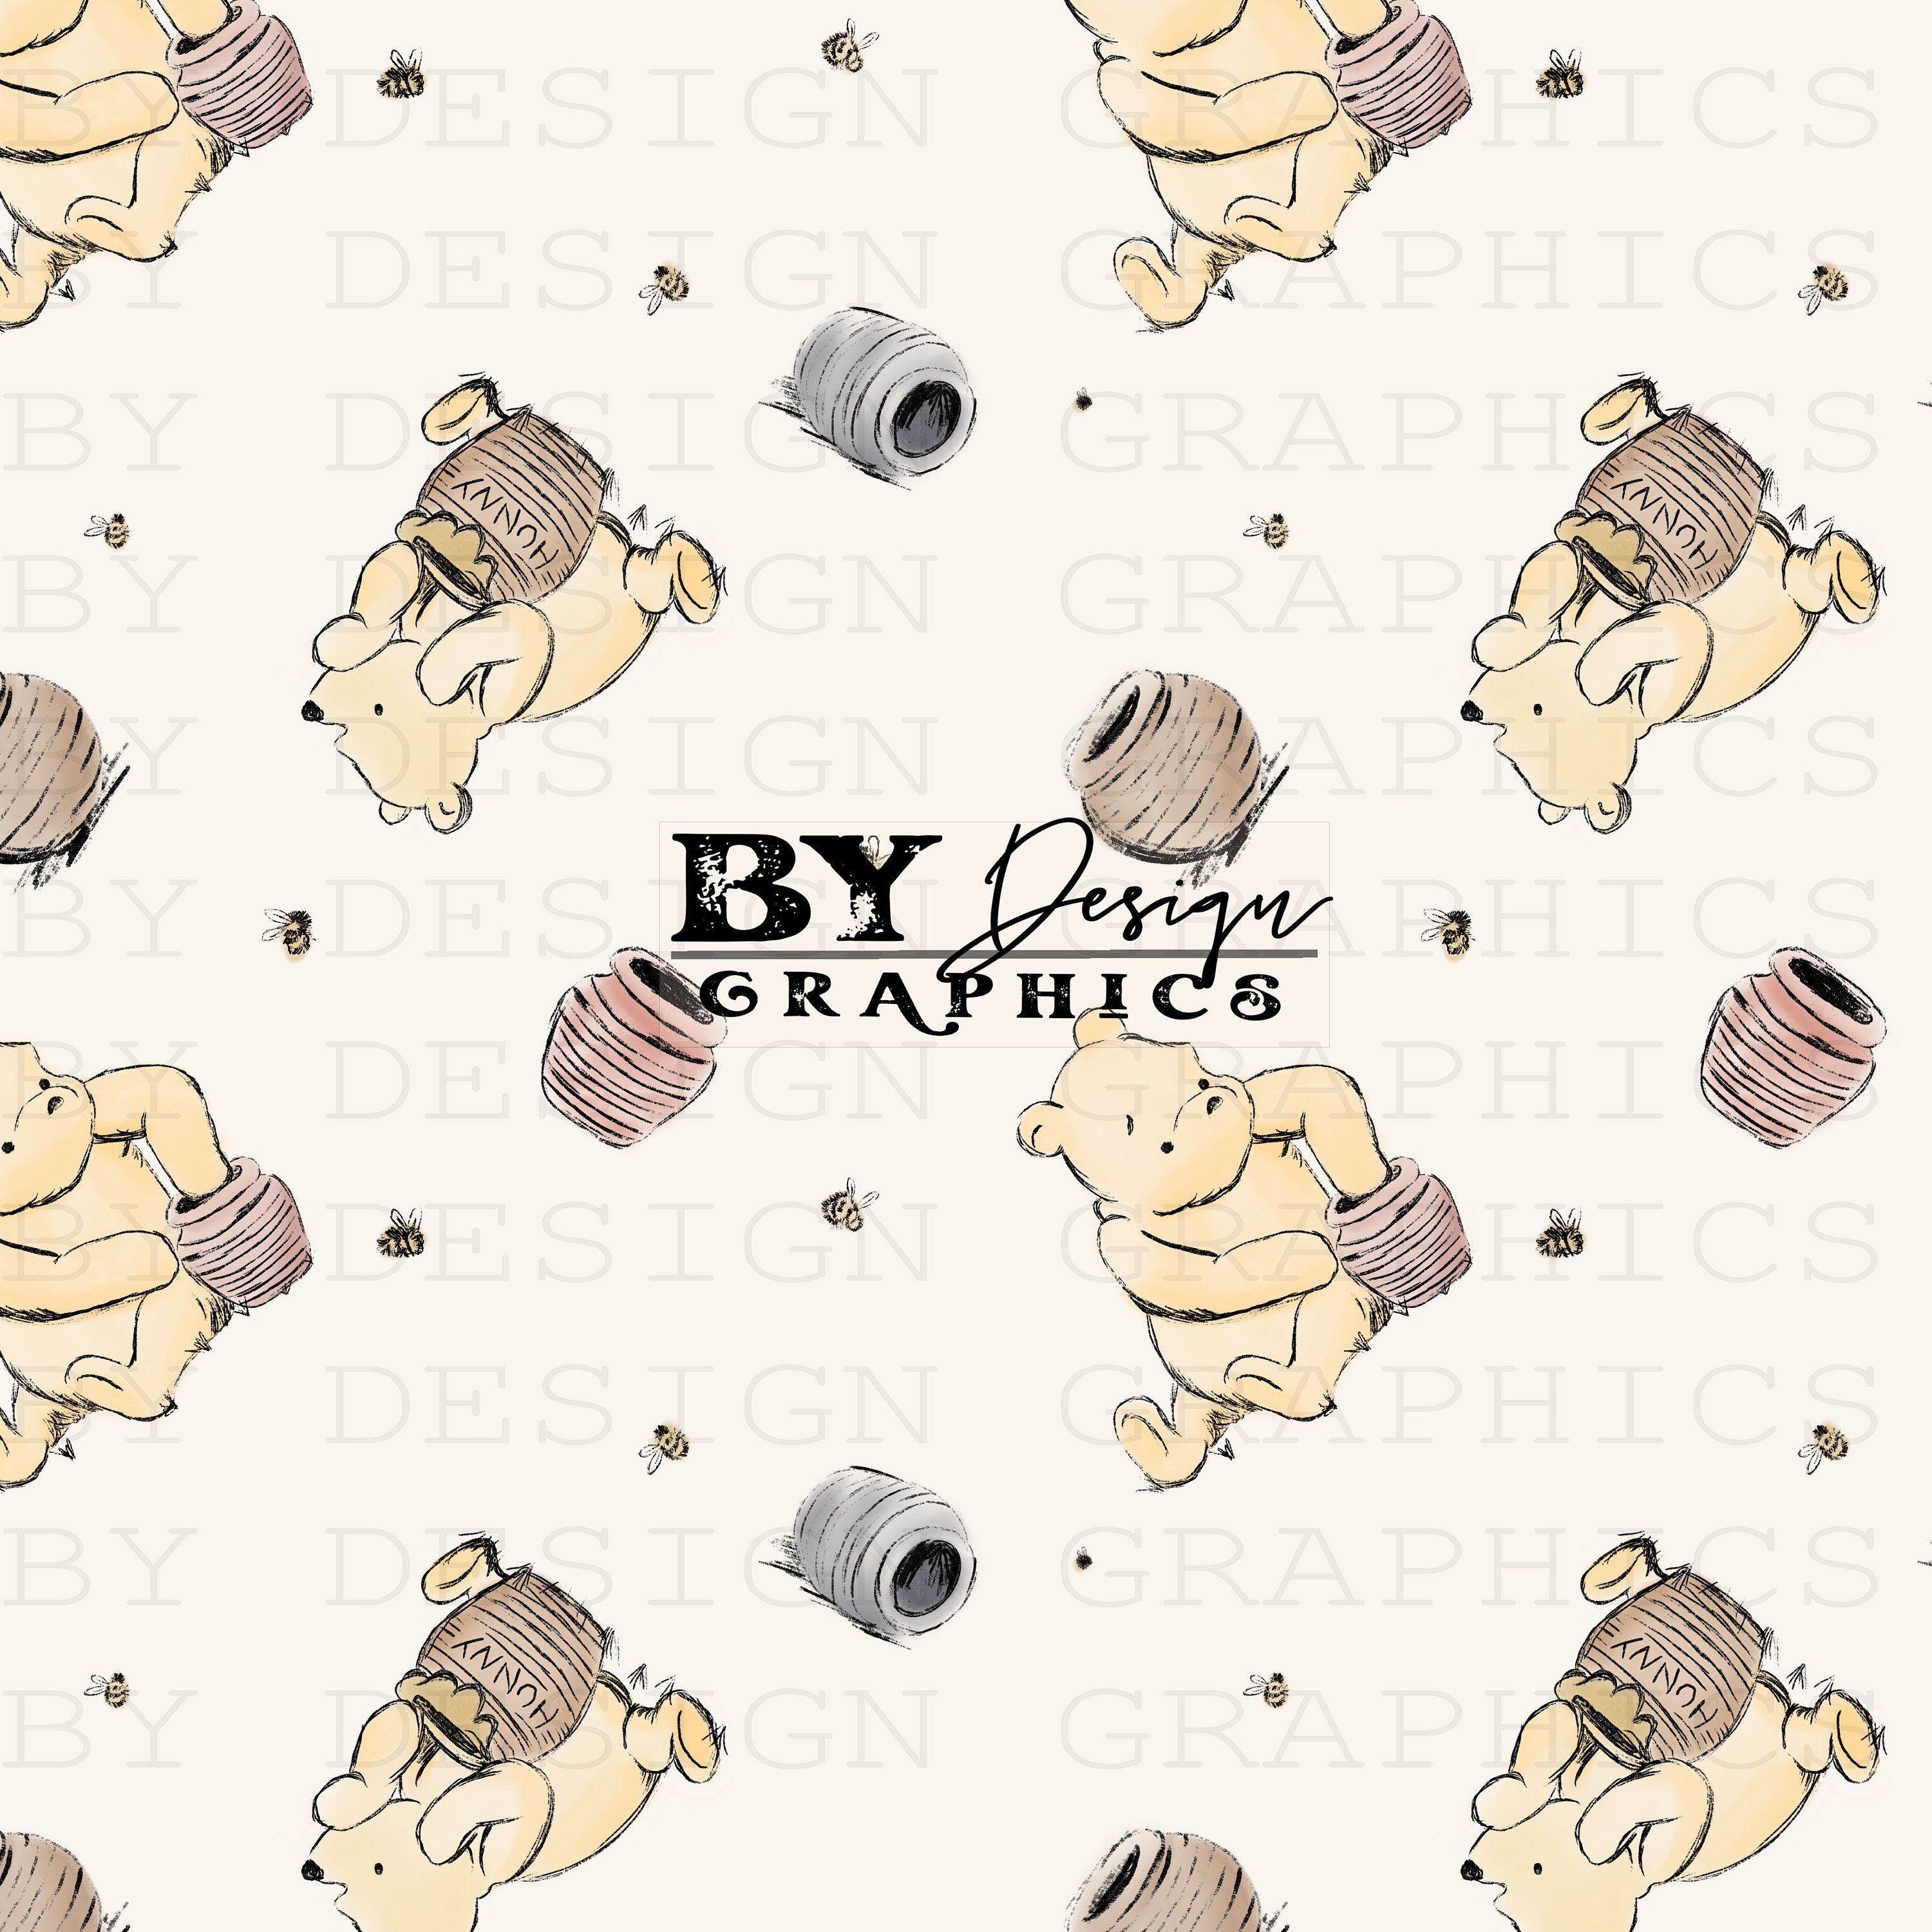 Winnie The Pooh Seamless Pattern, Classic Winnie the Pooh Seamless File  Winnie the Pooh Digital, Seamless Fabric Pooh – The Mom Squad